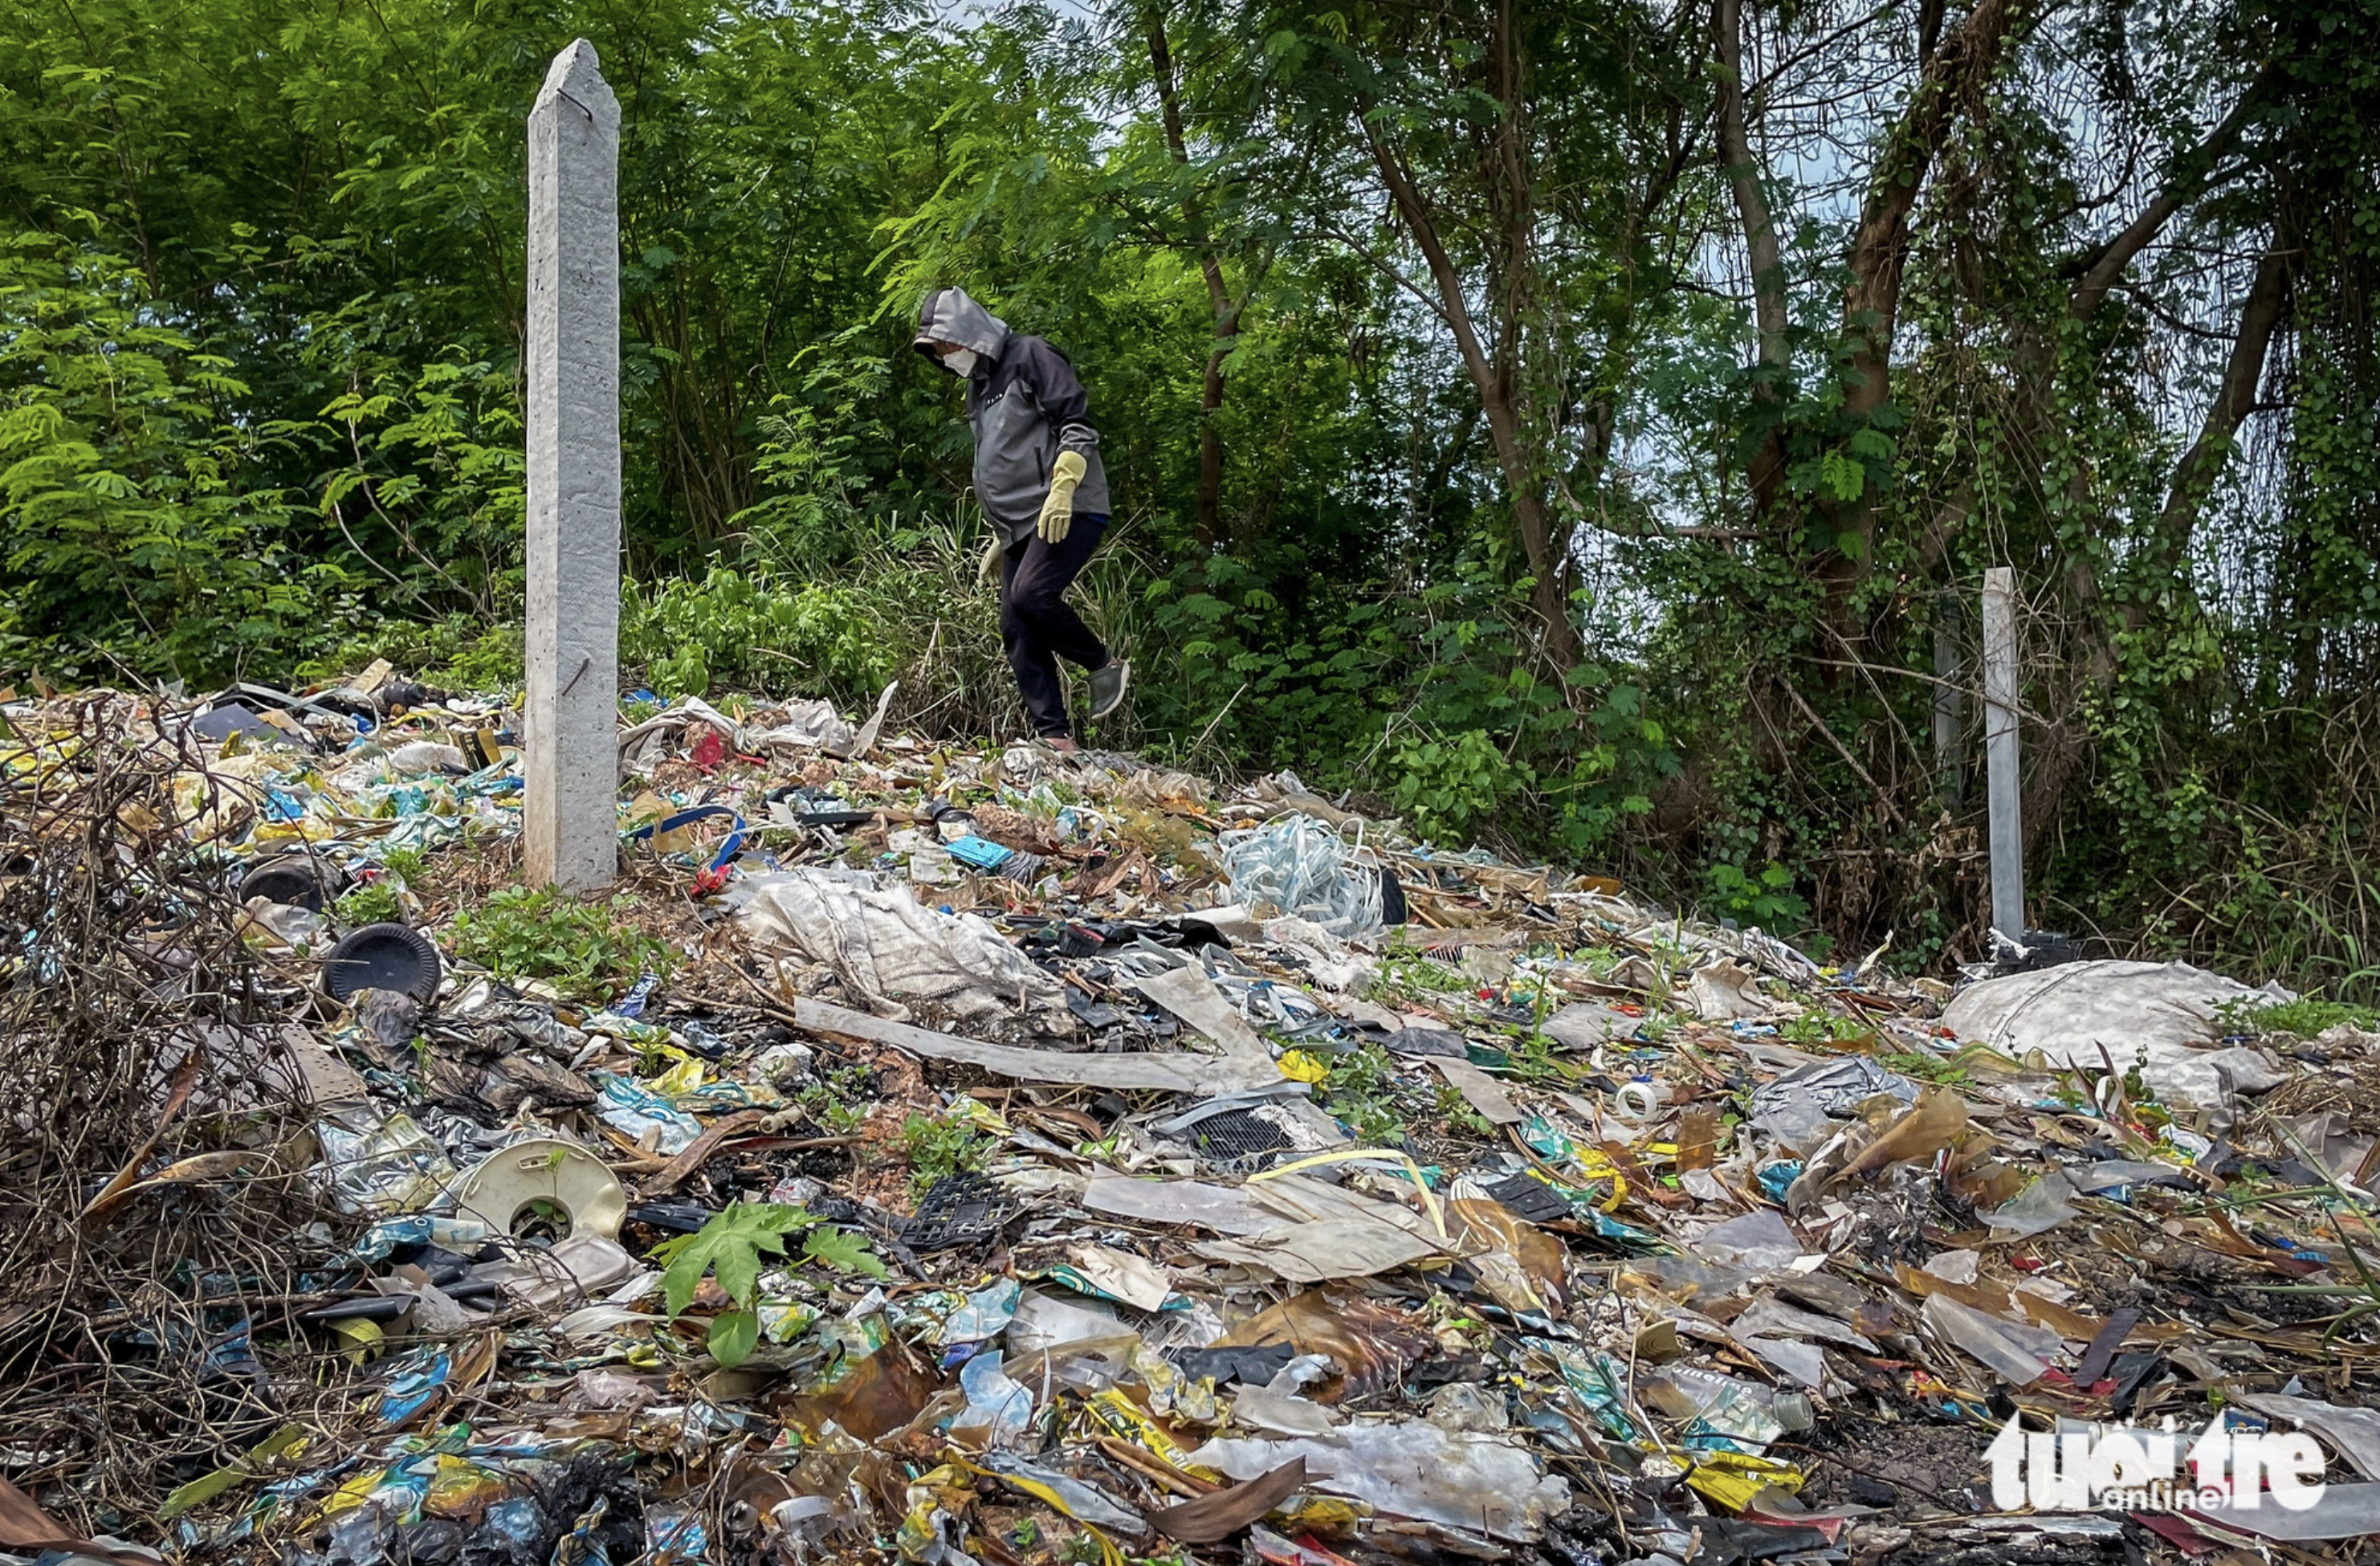 A two-meter pile of medical waste at an area along a swamp in Binh Tan District. Photo: Chau Tuan / Tuoi Tre